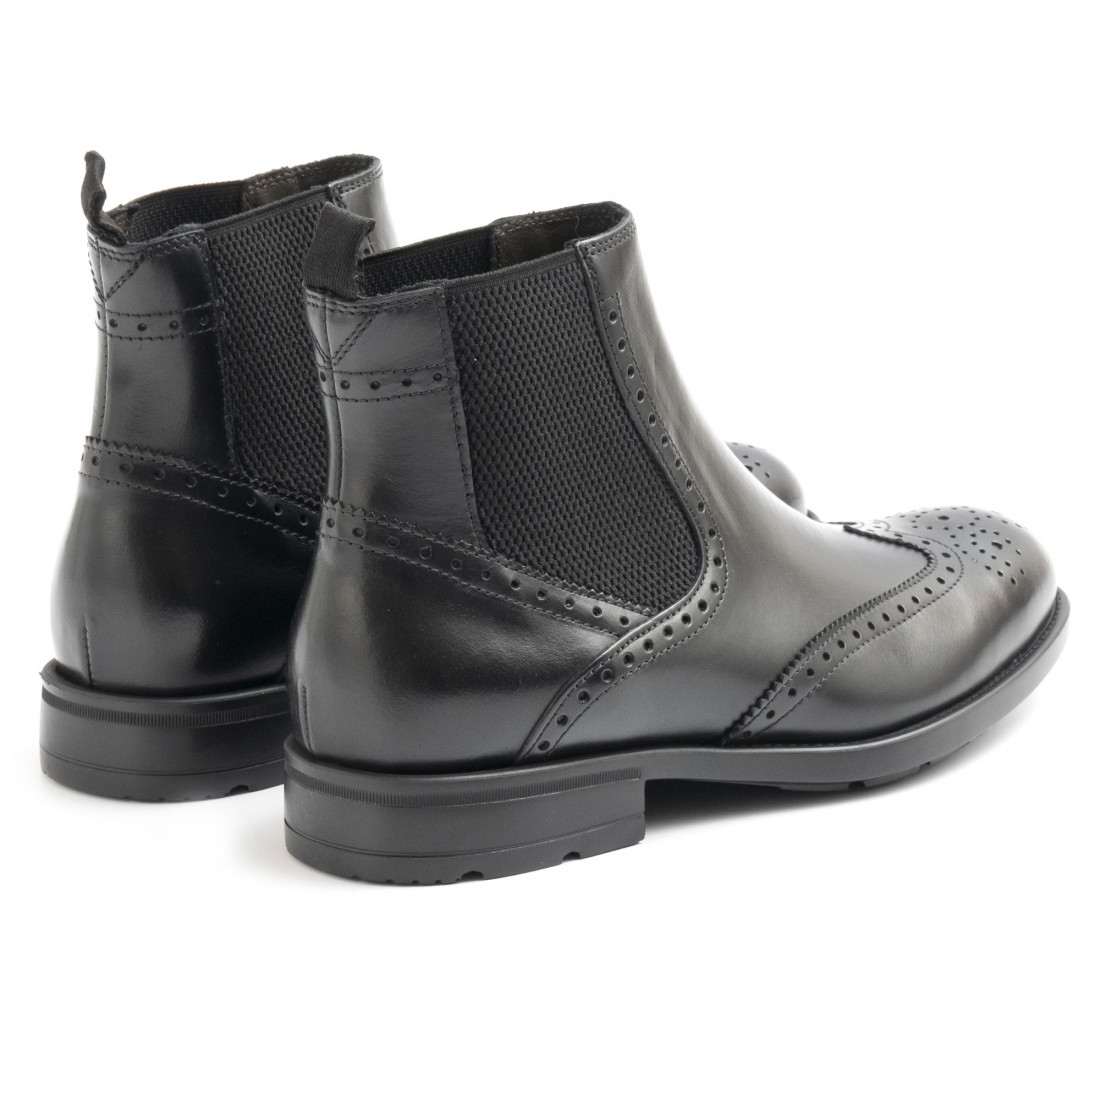 Black leather Marco Ferretti booties with elastic